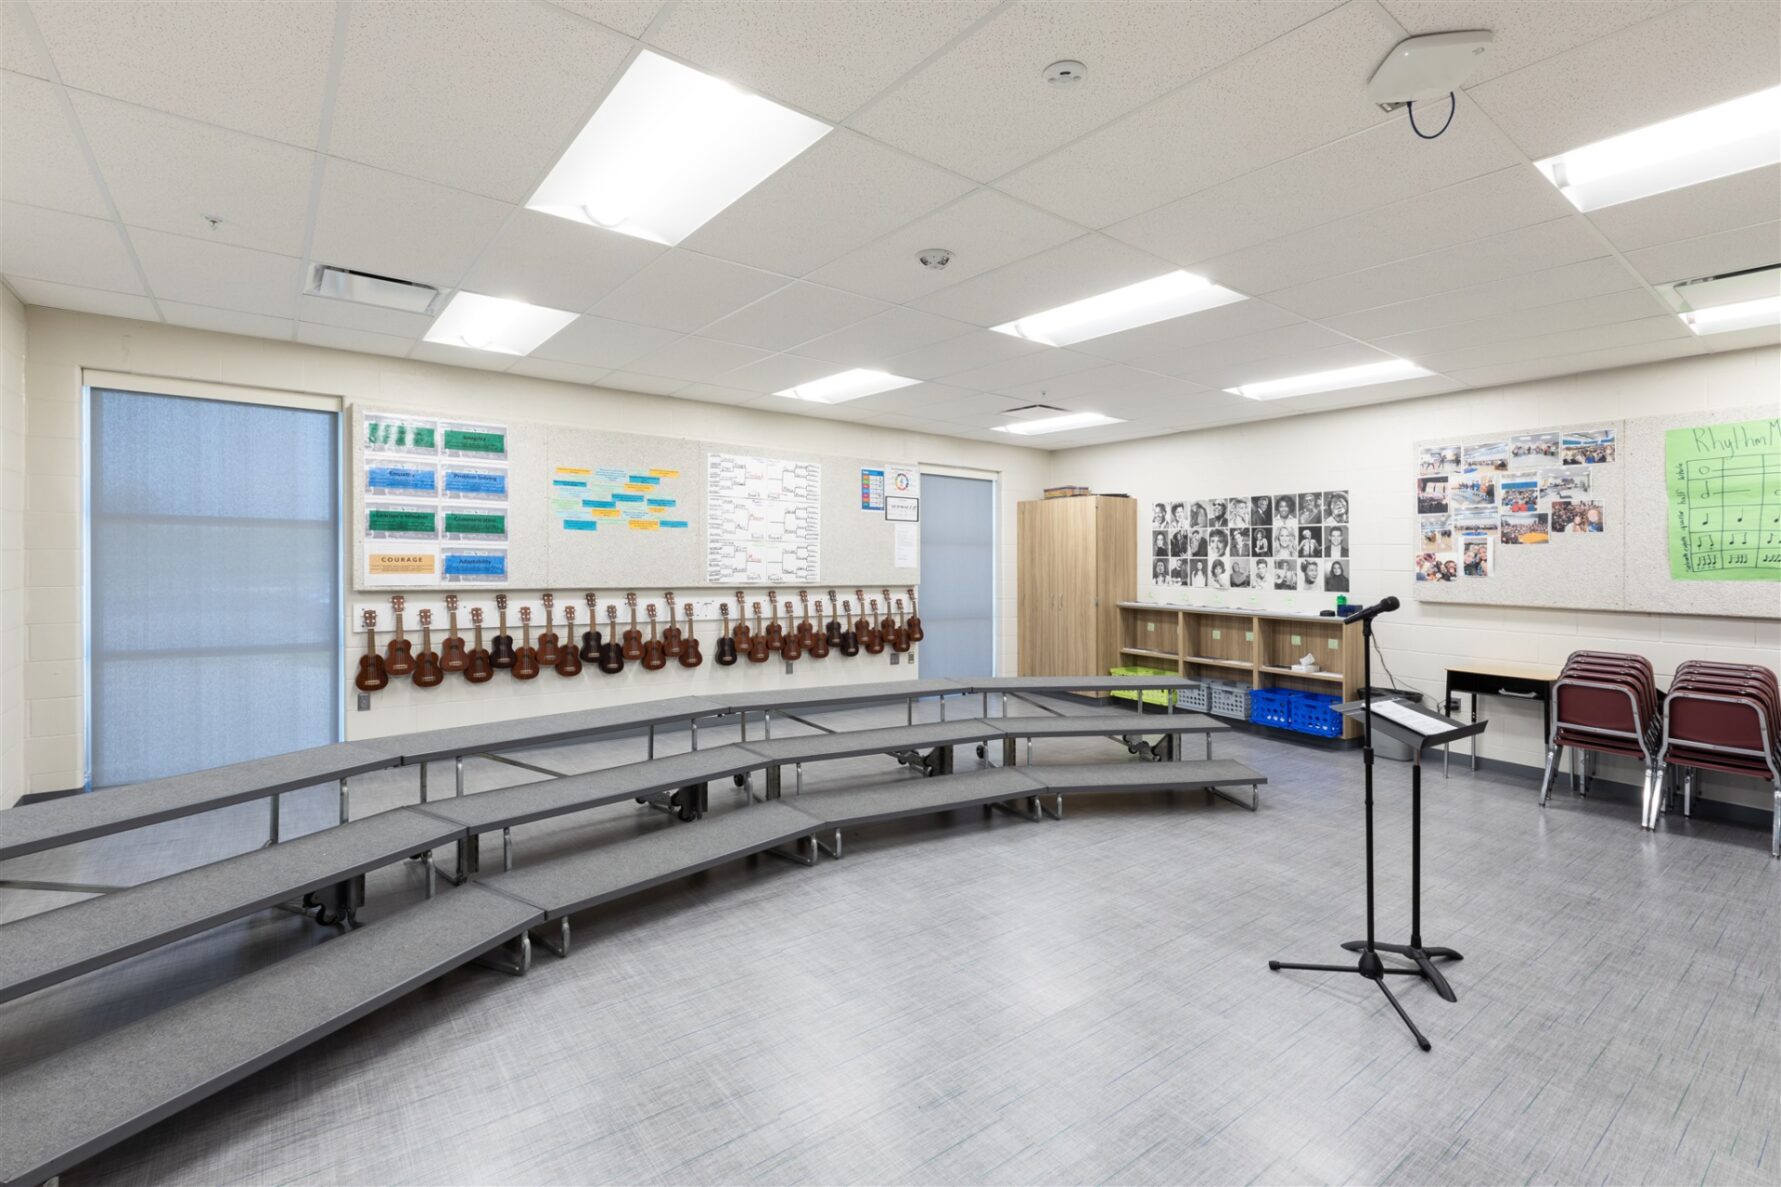 The choir classroom at the Gateway 6th Grade Center, renovated by McCownGordon